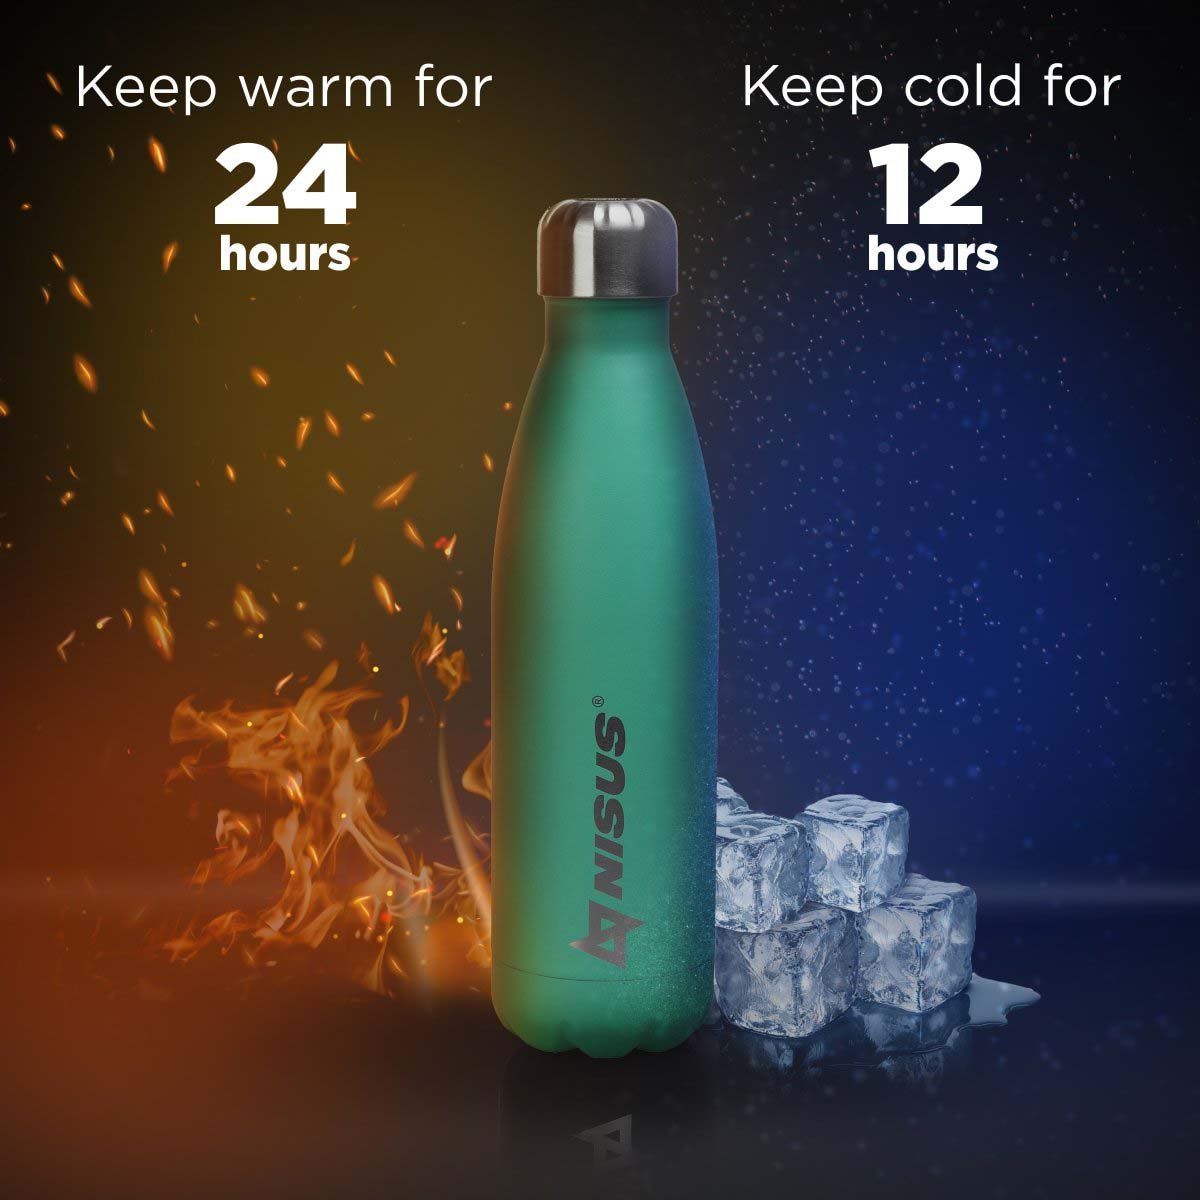 Stainless Steel Insulated Twist Top Water Bottle, 17 oz keeps beverage hot for 24 hours and cold for 12 hours